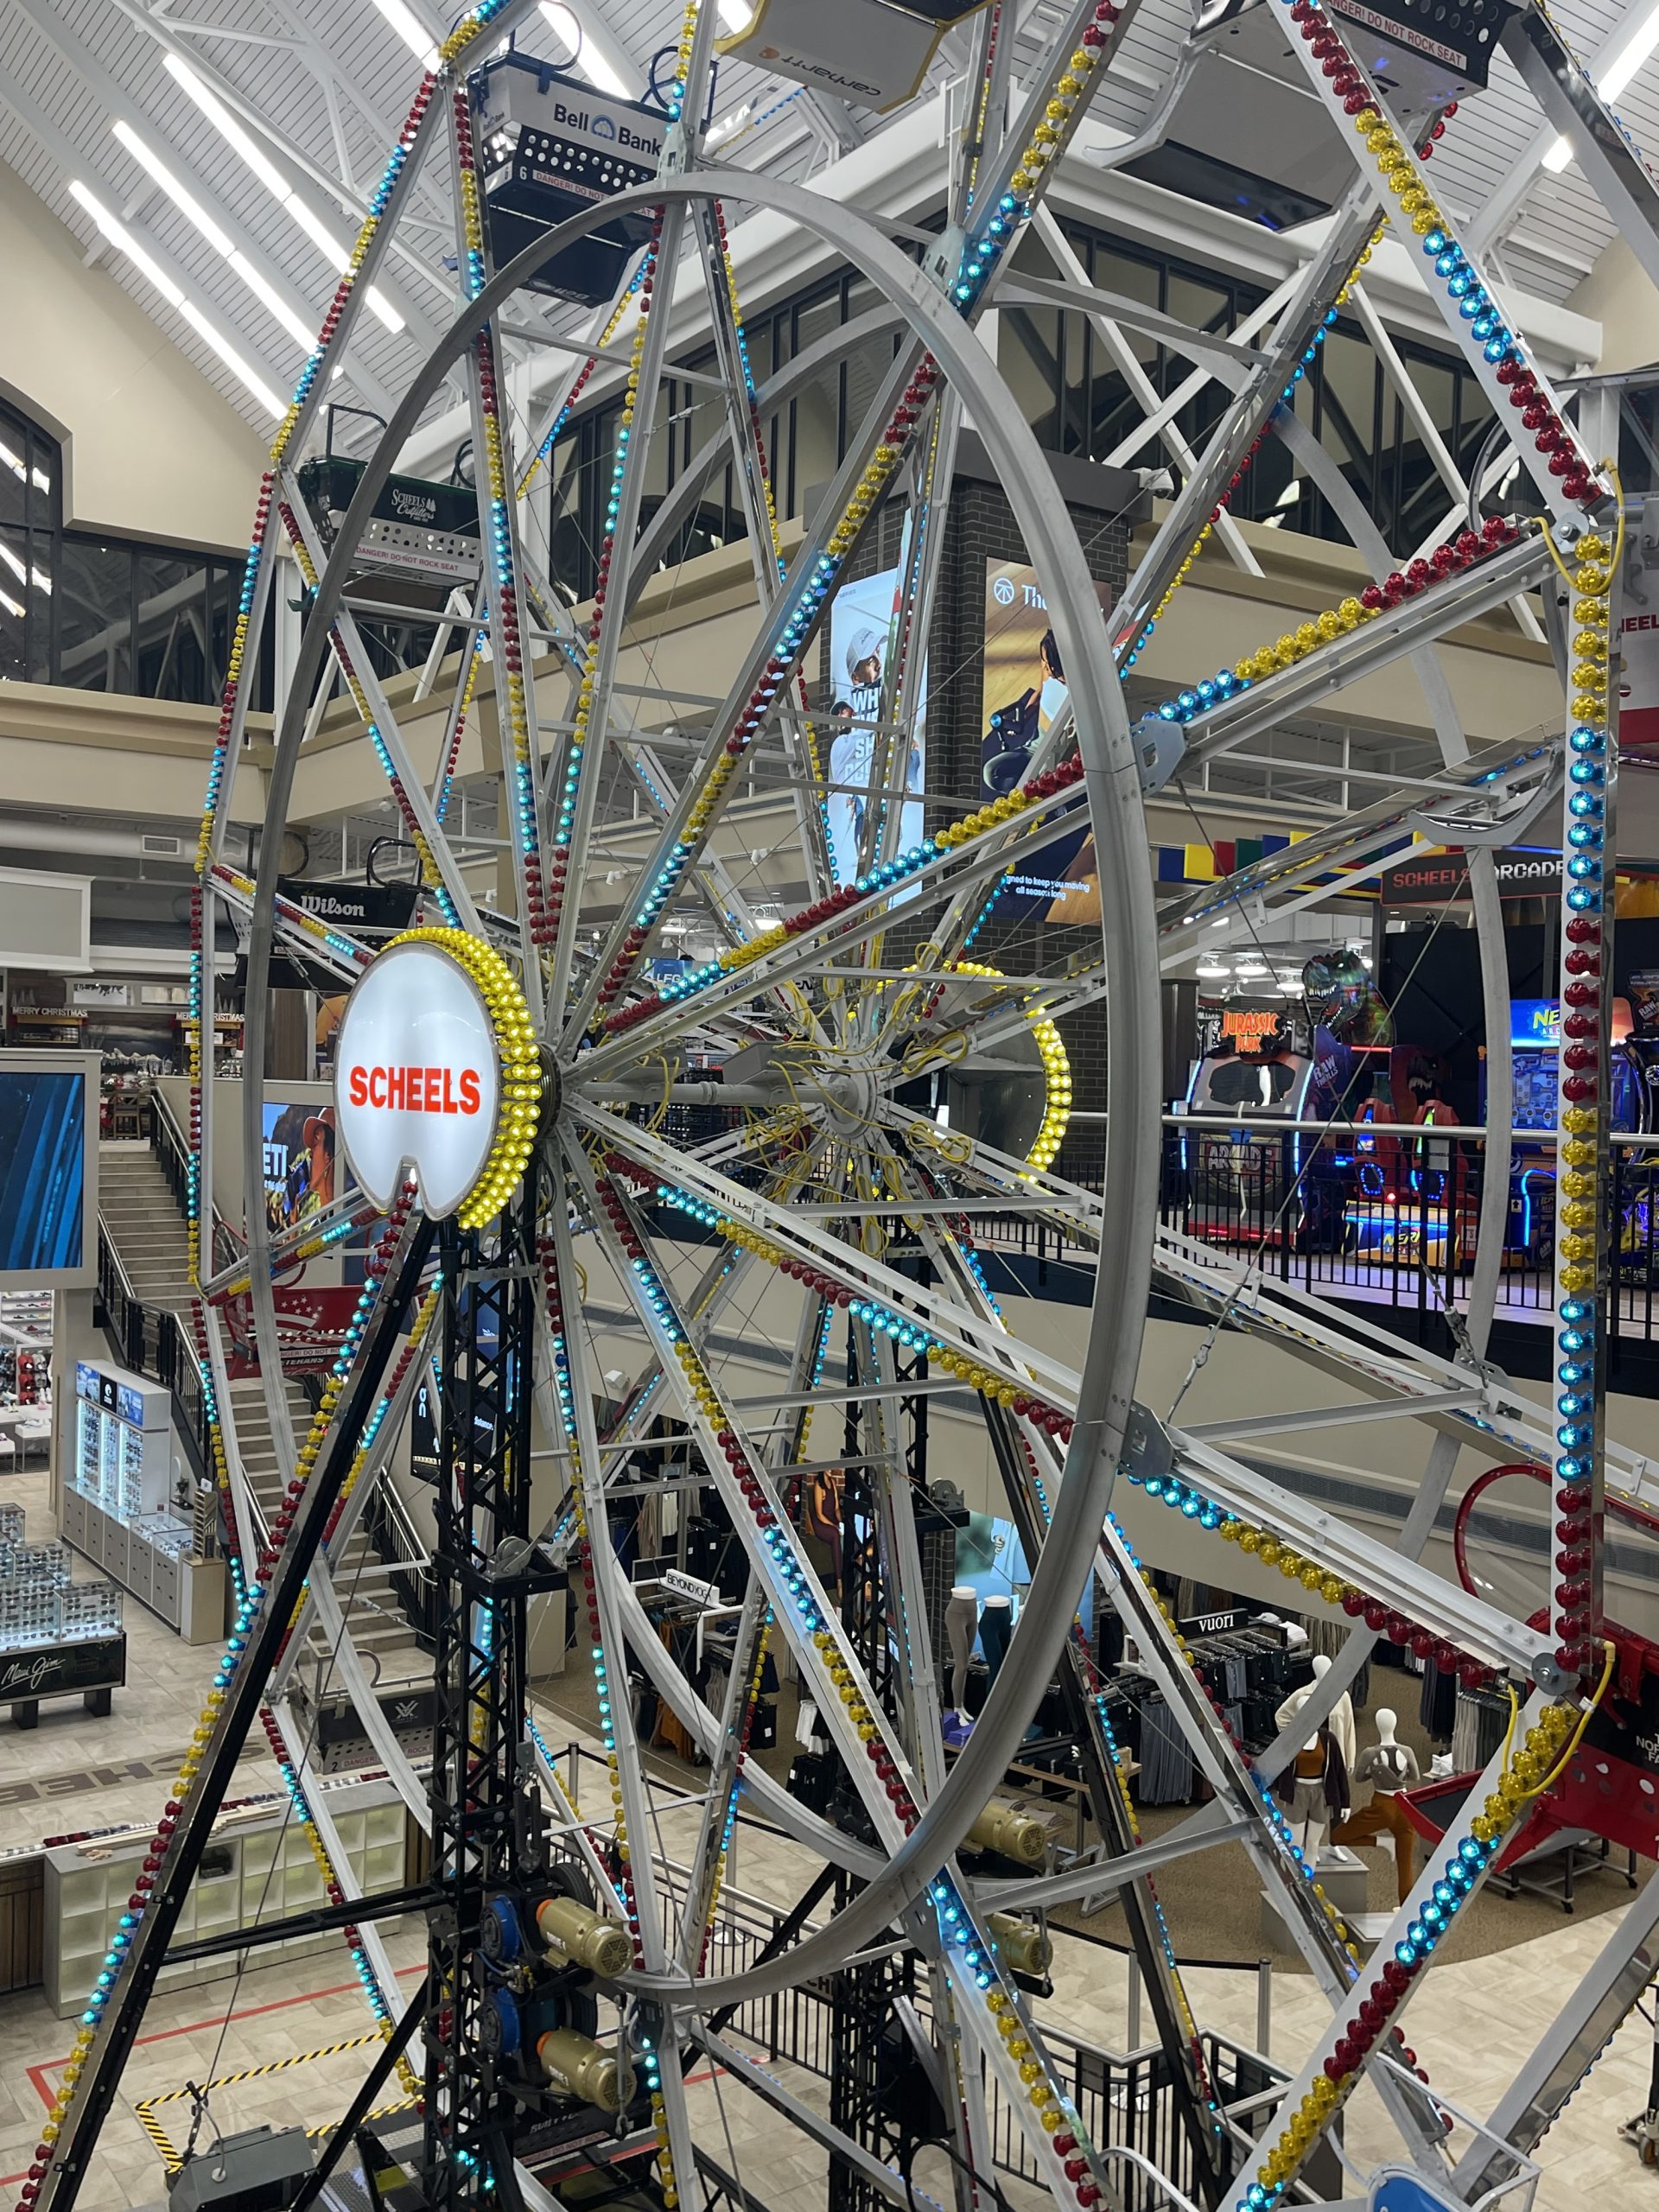 The Chandler SCHEELS Ferris Wheel and other attractions for families